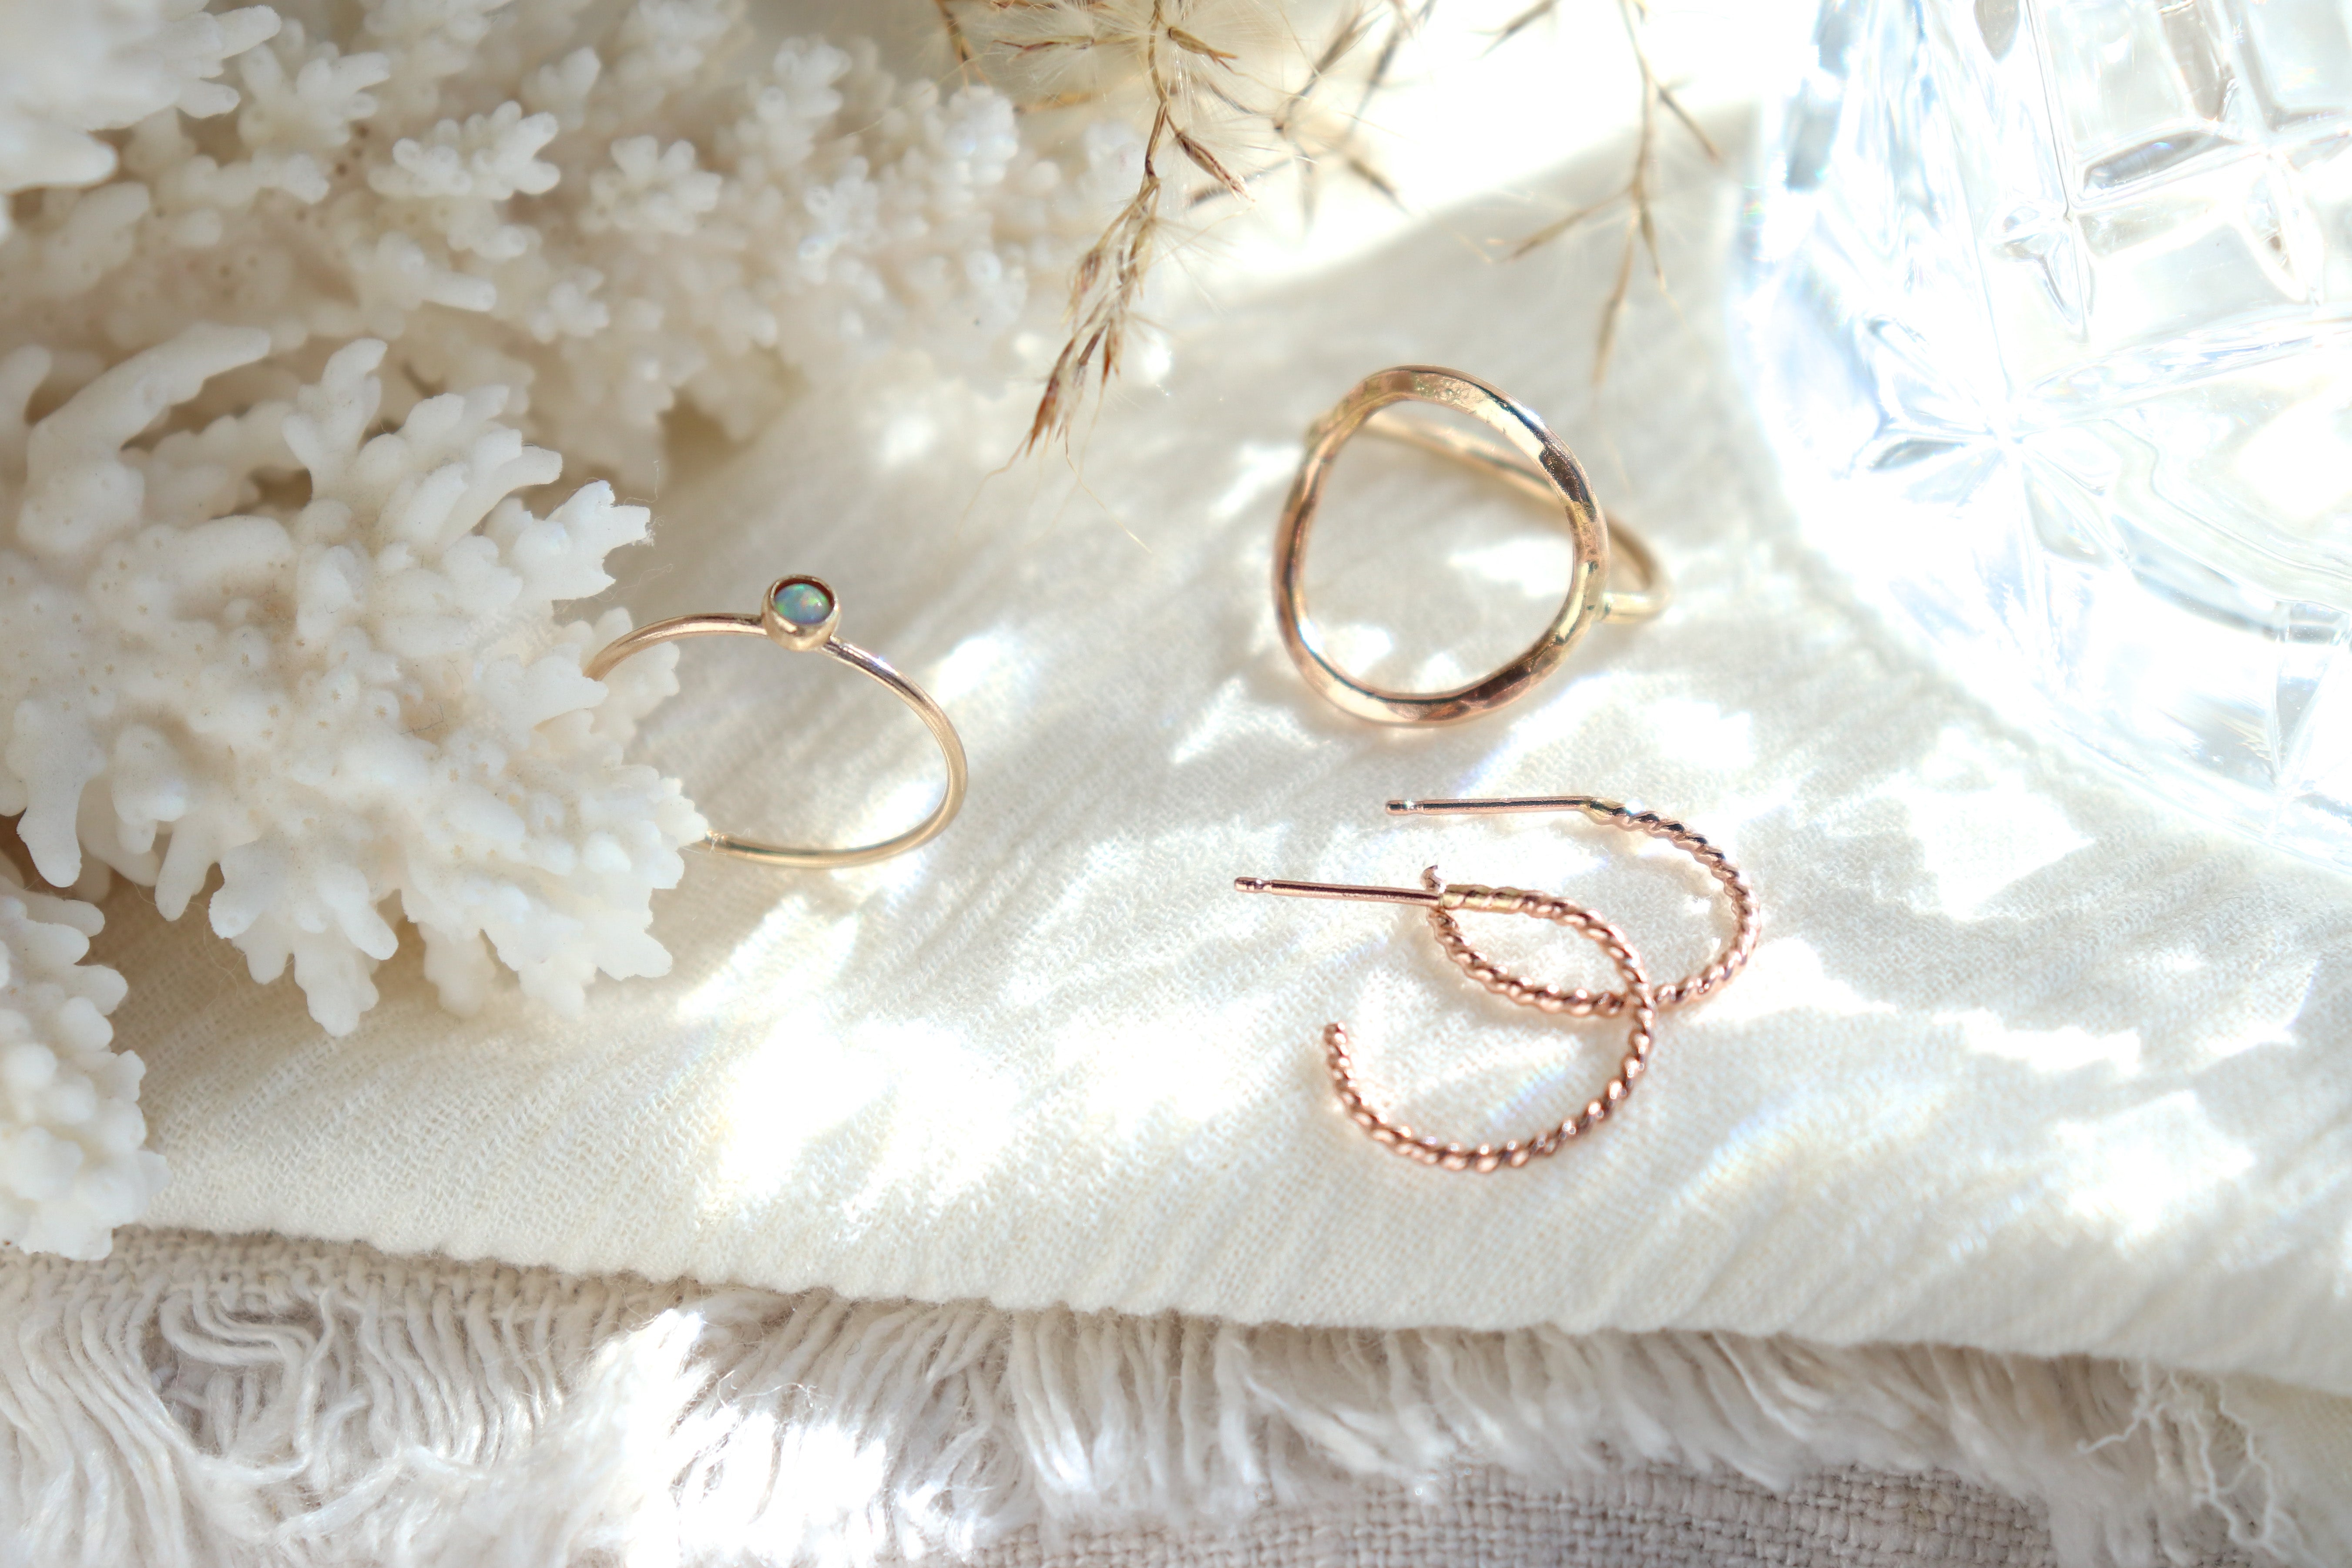 Several pieces of dainty, minimalist jewelry including a gold opal ring, round gold hammered statement ring and a pair of small rose gold huggie hoop earrings are displayed on a light background consisting of a linen fabric hi lighted by scattered light from a crystal glass and soft coral and dried floral in the background.